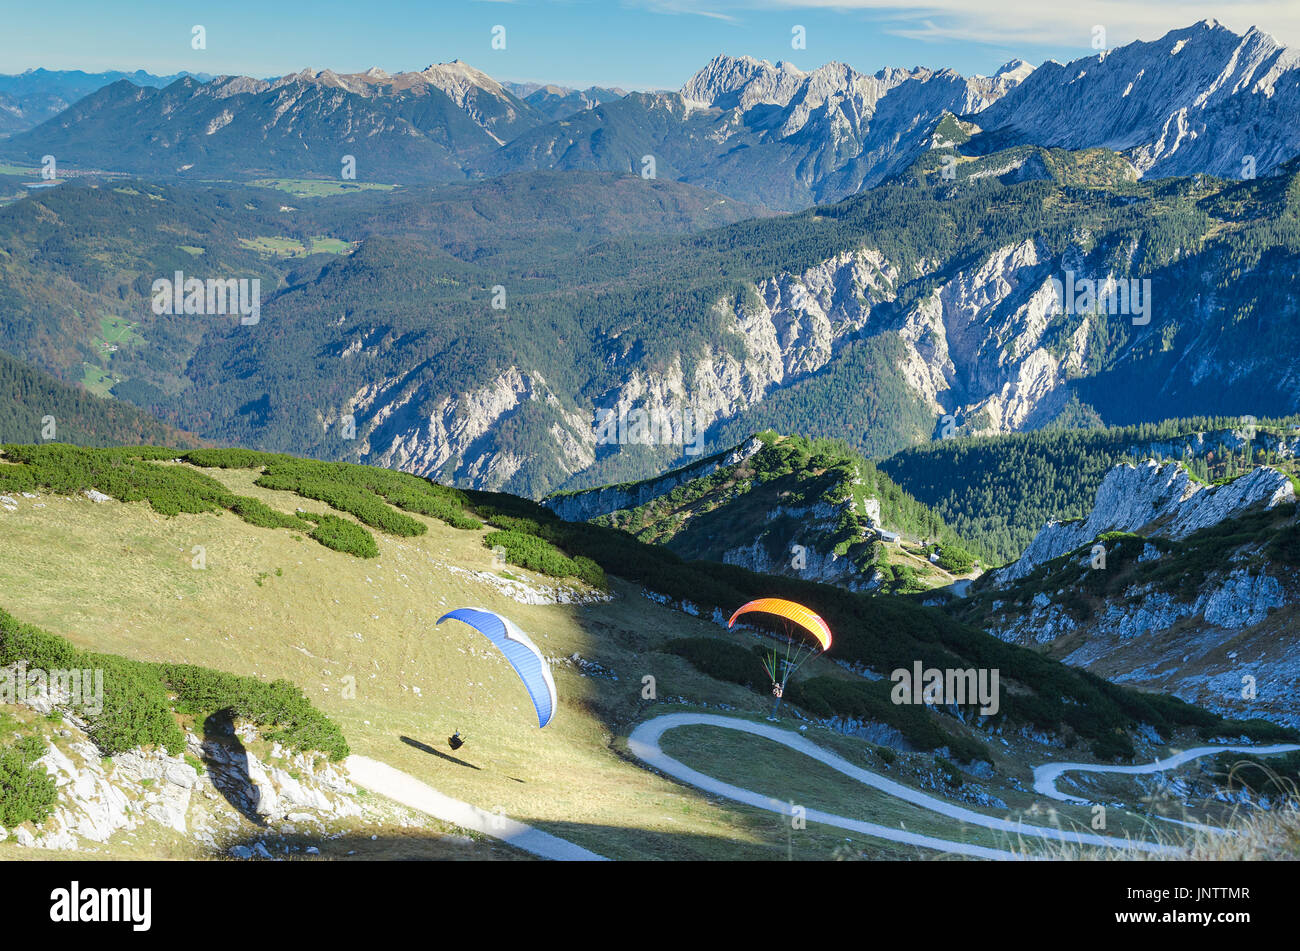 Pair paraplanes launching and soaring in Bavarian Alps mountains. Stock photo with aerial view on Alpine landscape. Stock Photo